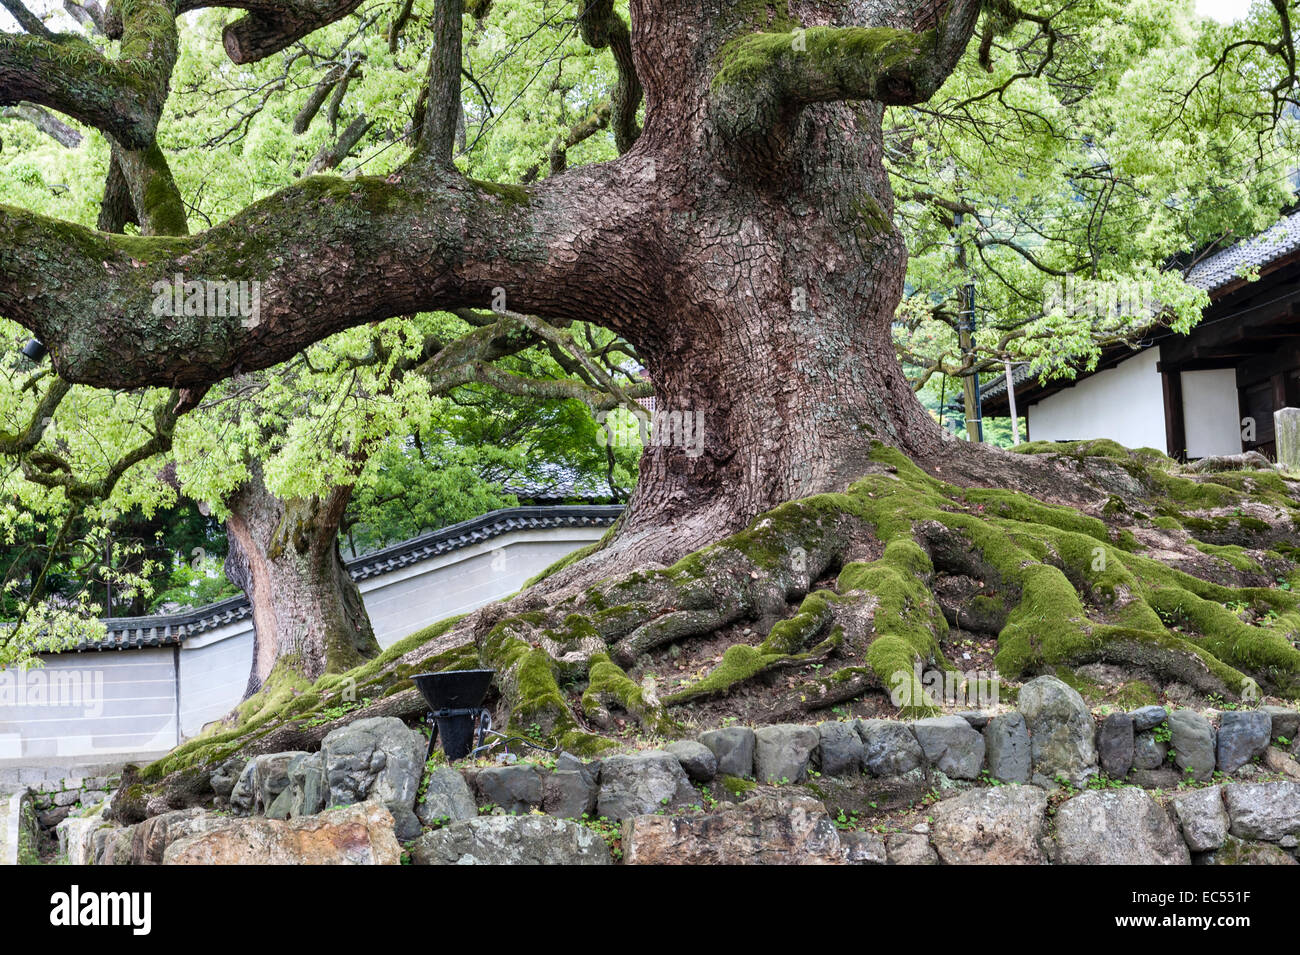 An ancient camphor tree (cinnamomum camphora, or kusunoki) stands outside a temple in the Nanzen-ji temple complex, Kyoto, Japan Stock Photo